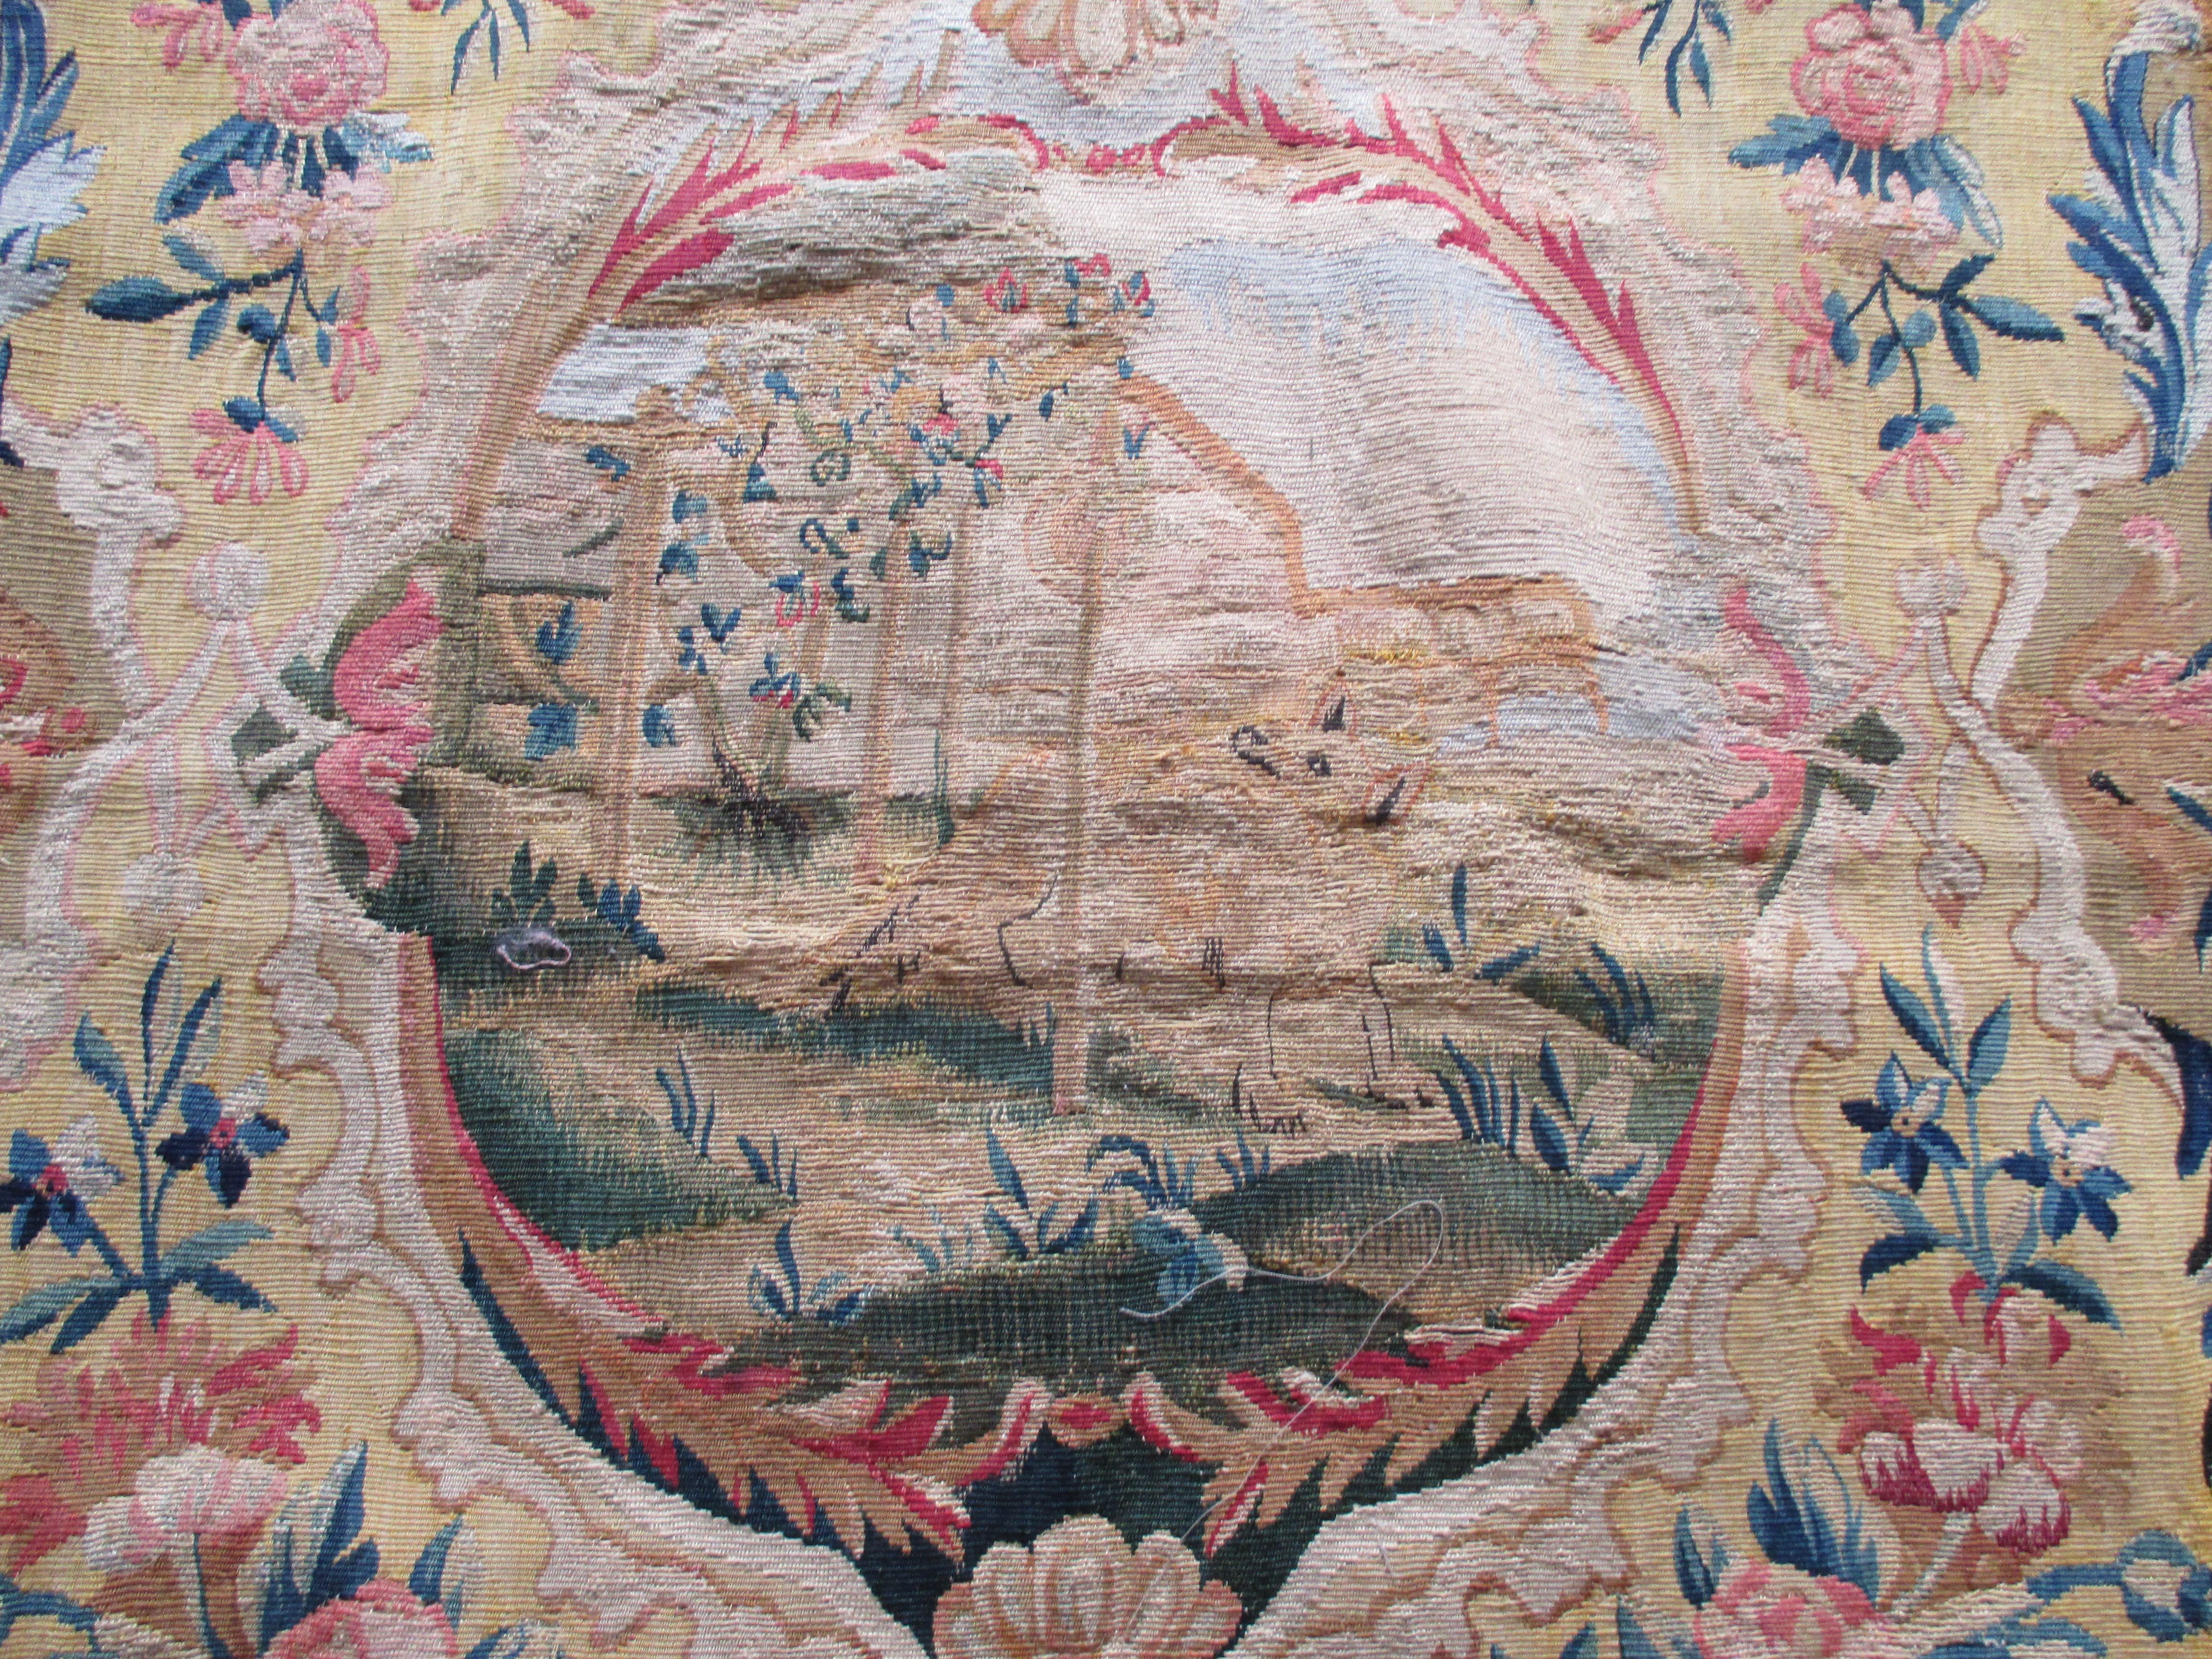 Antique tapestry fragment picturing center oval medallion with bucolic scene
In shades of red, yellow, blue, orange, pink and taupe.
Needs restoration. Sold as is.
With a fox and birds center stage and a design of pink flowers and blue vines